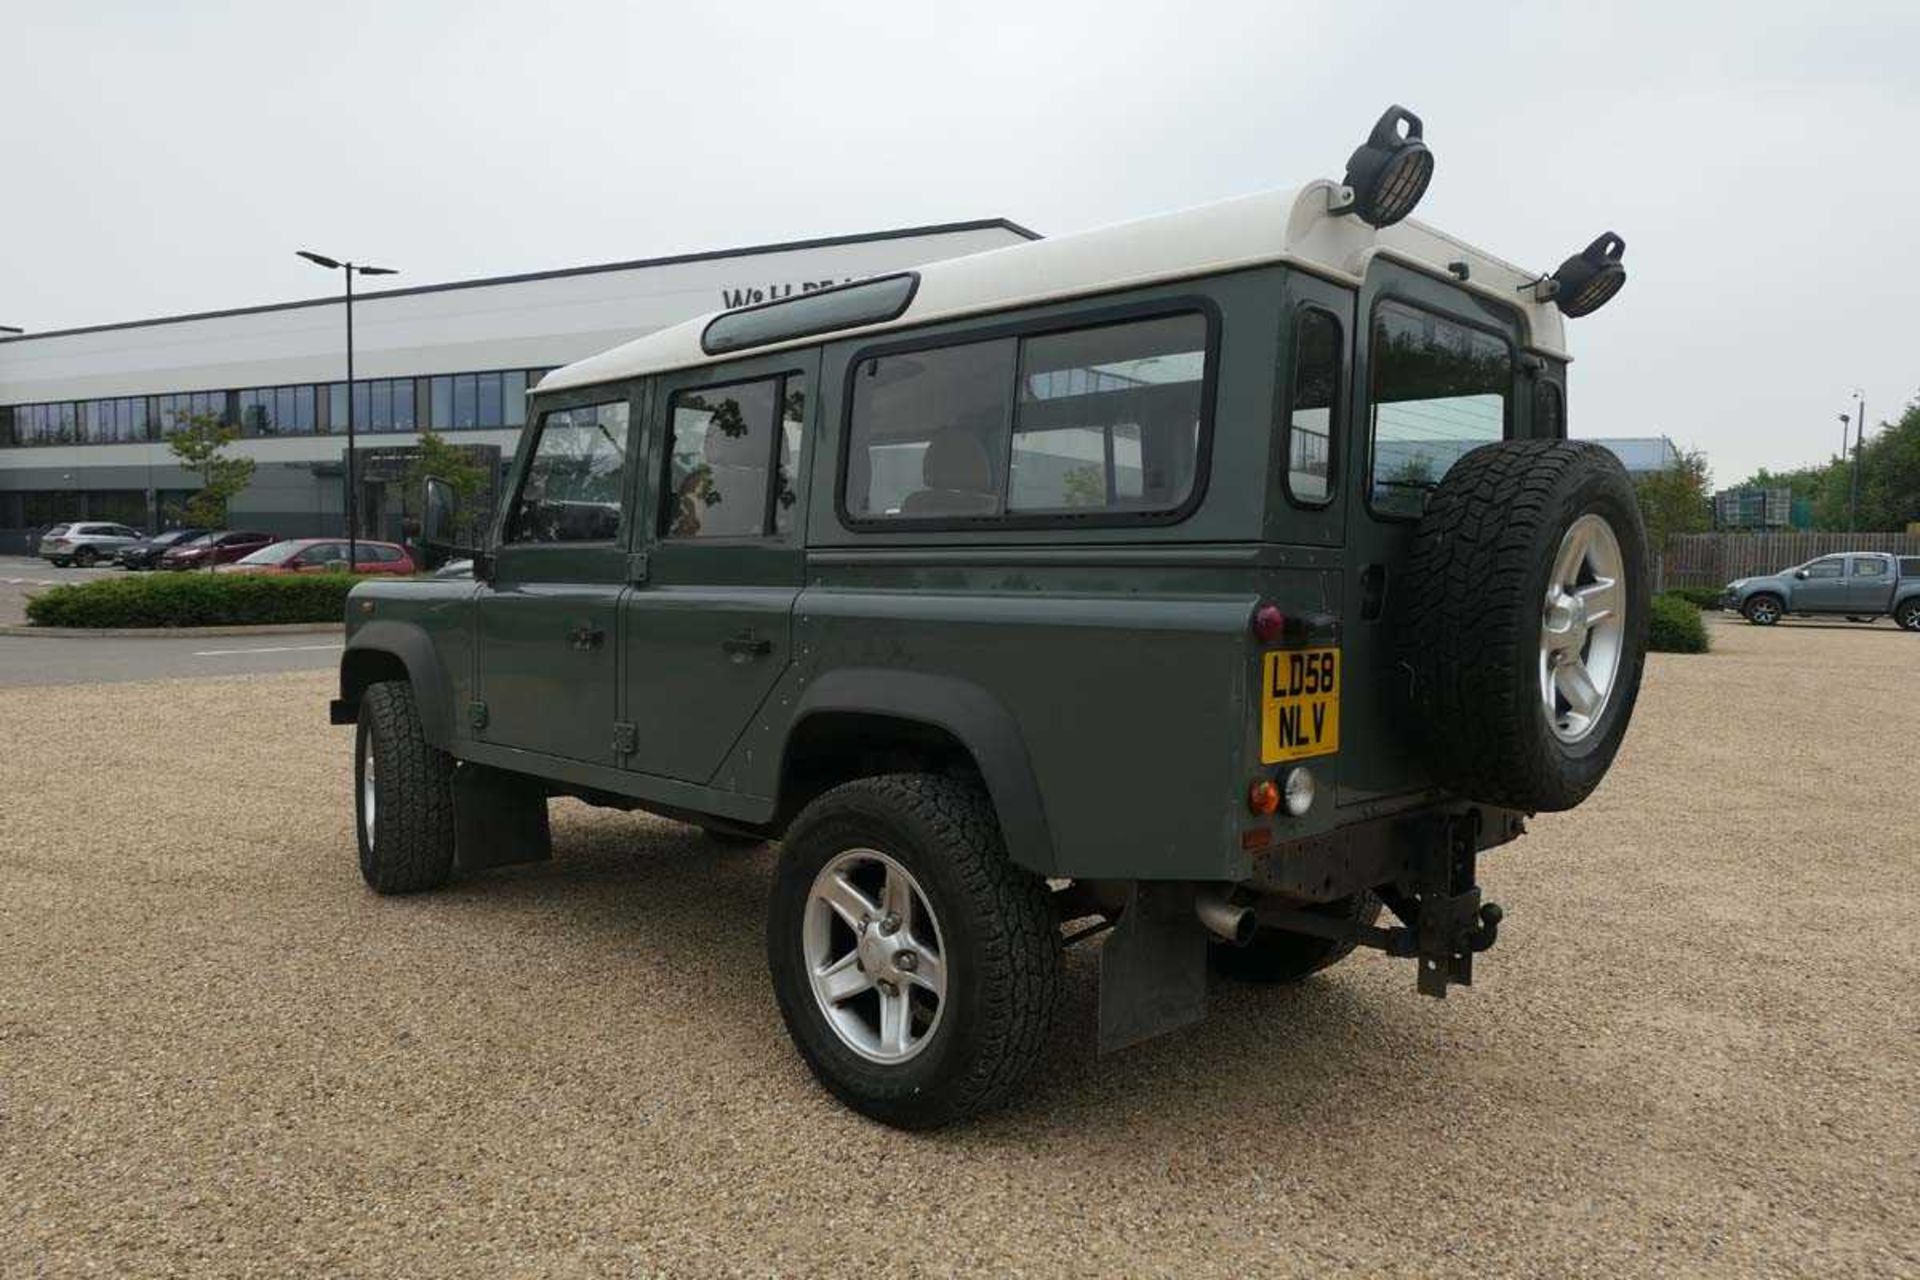 (LD58 NLV) 2008 Land Rover Defender 110 LWB station wagon estate in green, 2402cc diesel, 6-speed - Image 19 of 20